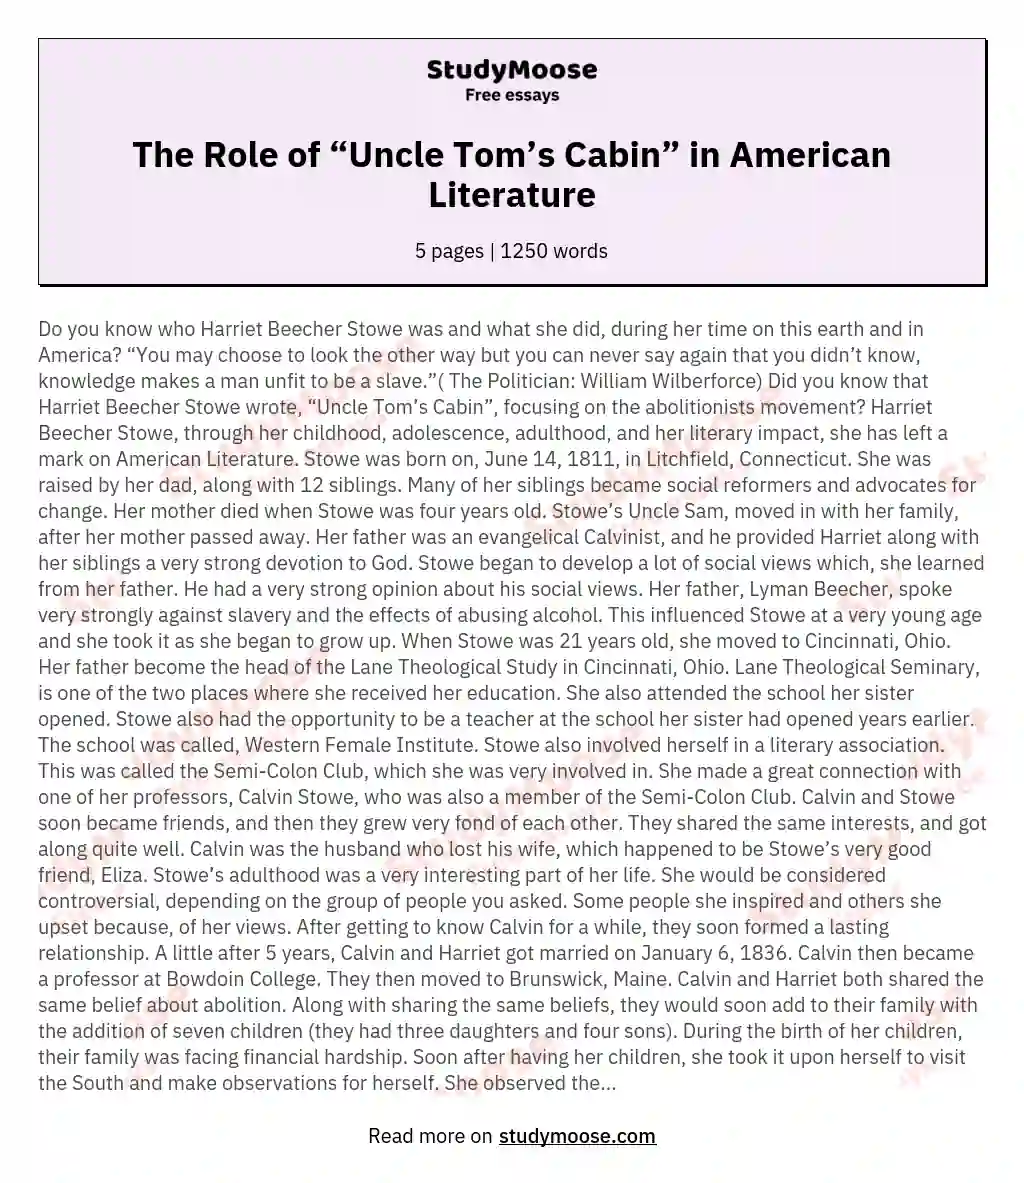 The Role of “Uncle Tom’s Cabin” in American Literature essay